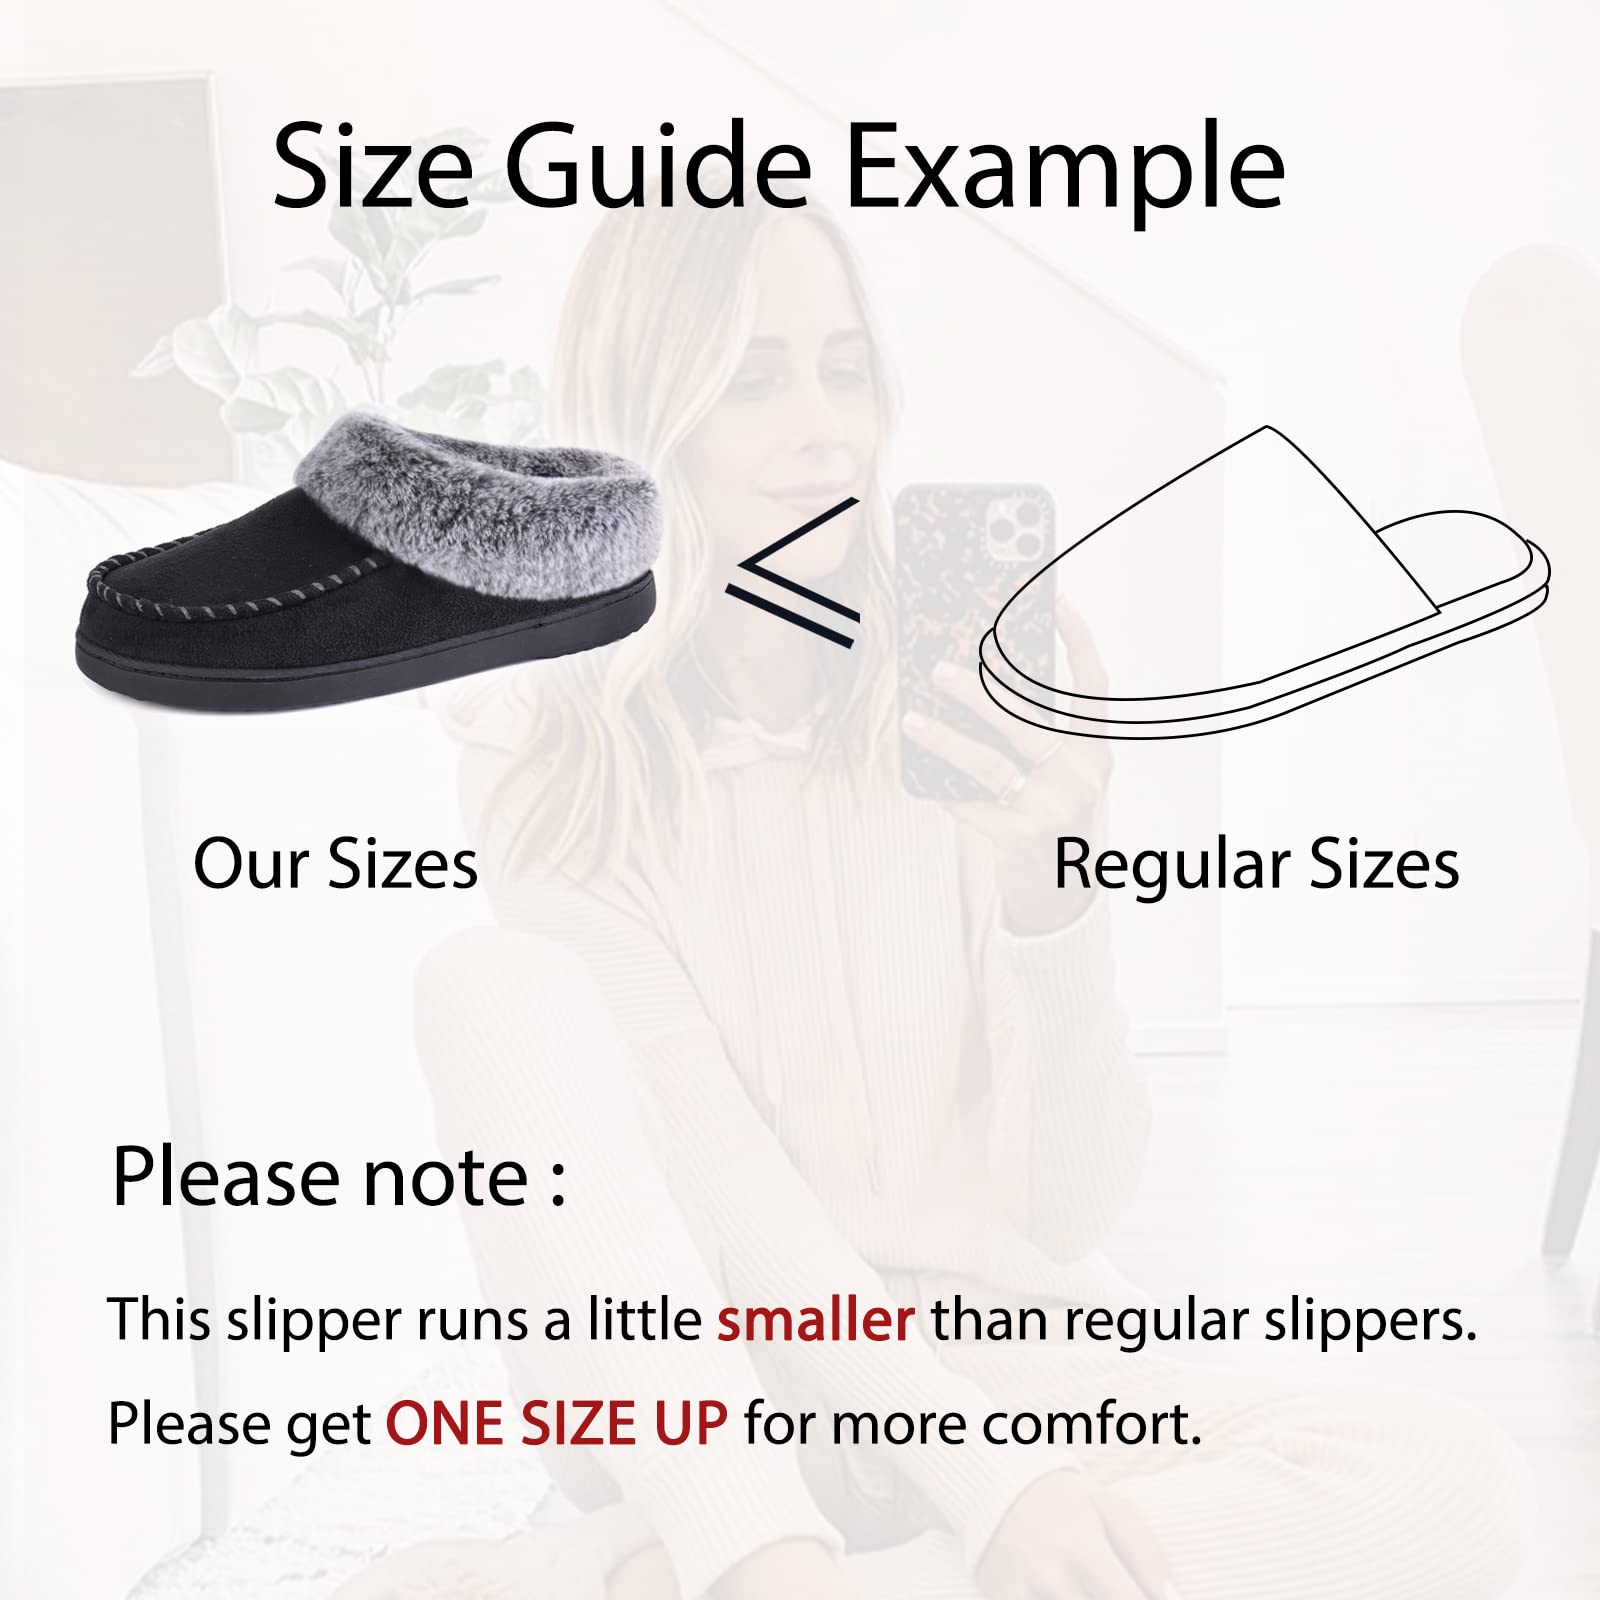 ULTRAIDEAS Women's Fur Lined Memory Foam Slippers for Indoor & Outdoor,Women's House Shoes